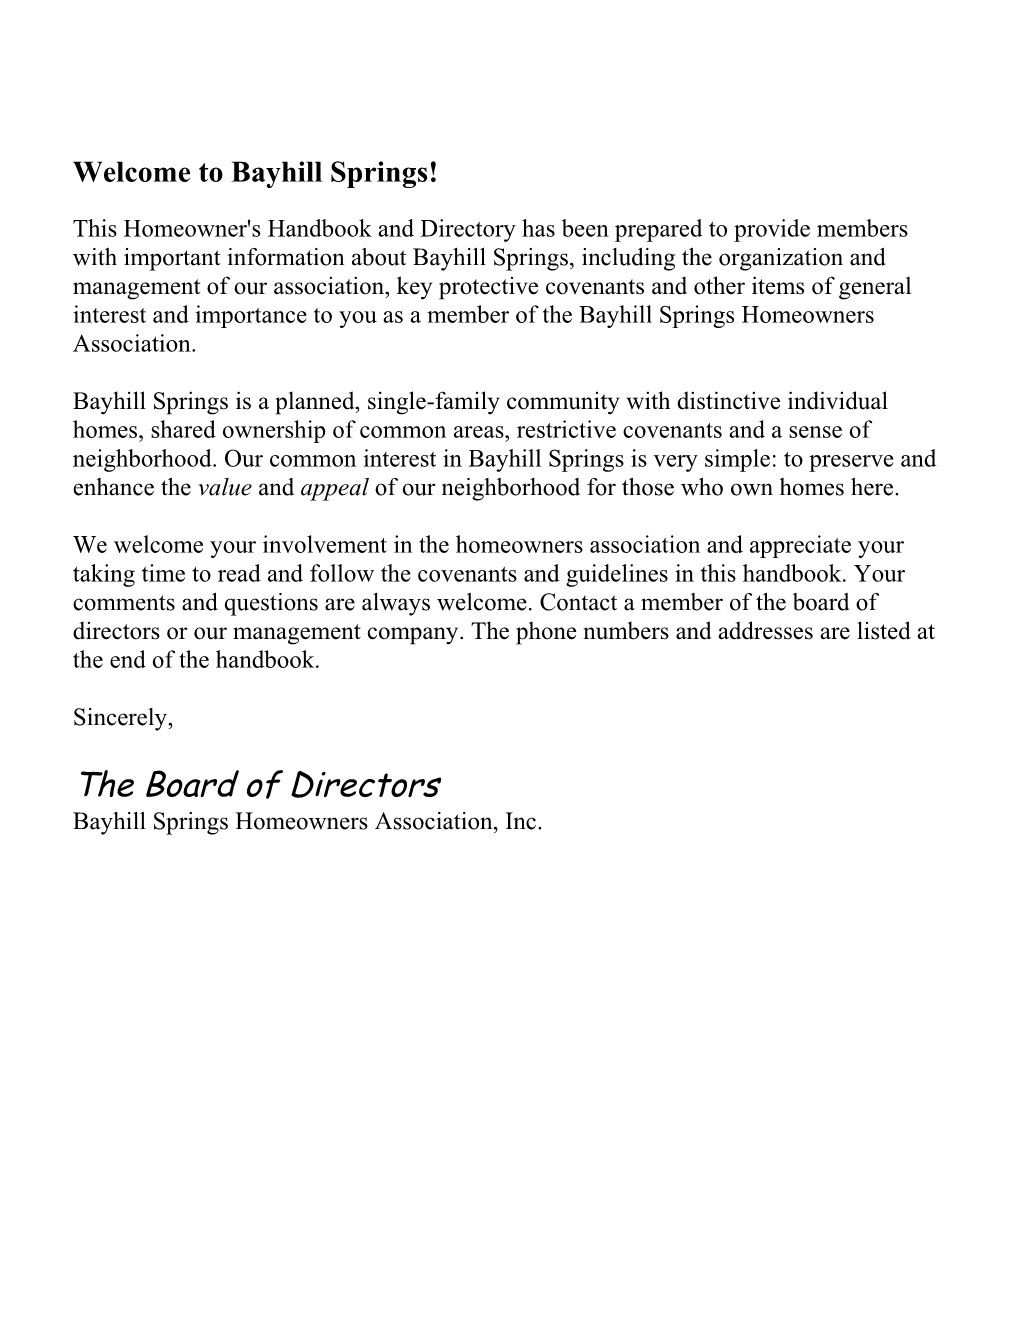 Welcome to Bayhill Springs!